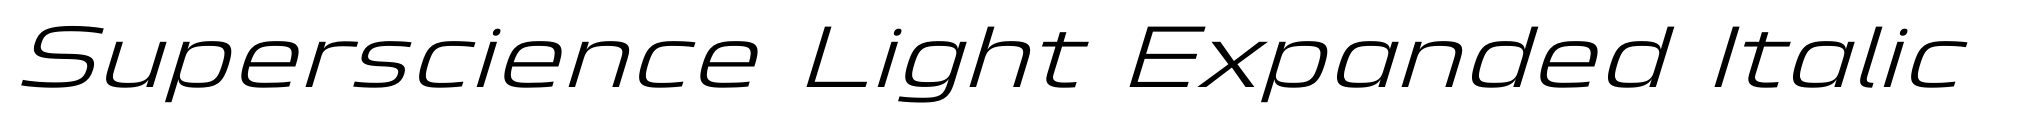 Superscience Light Expanded Italic image